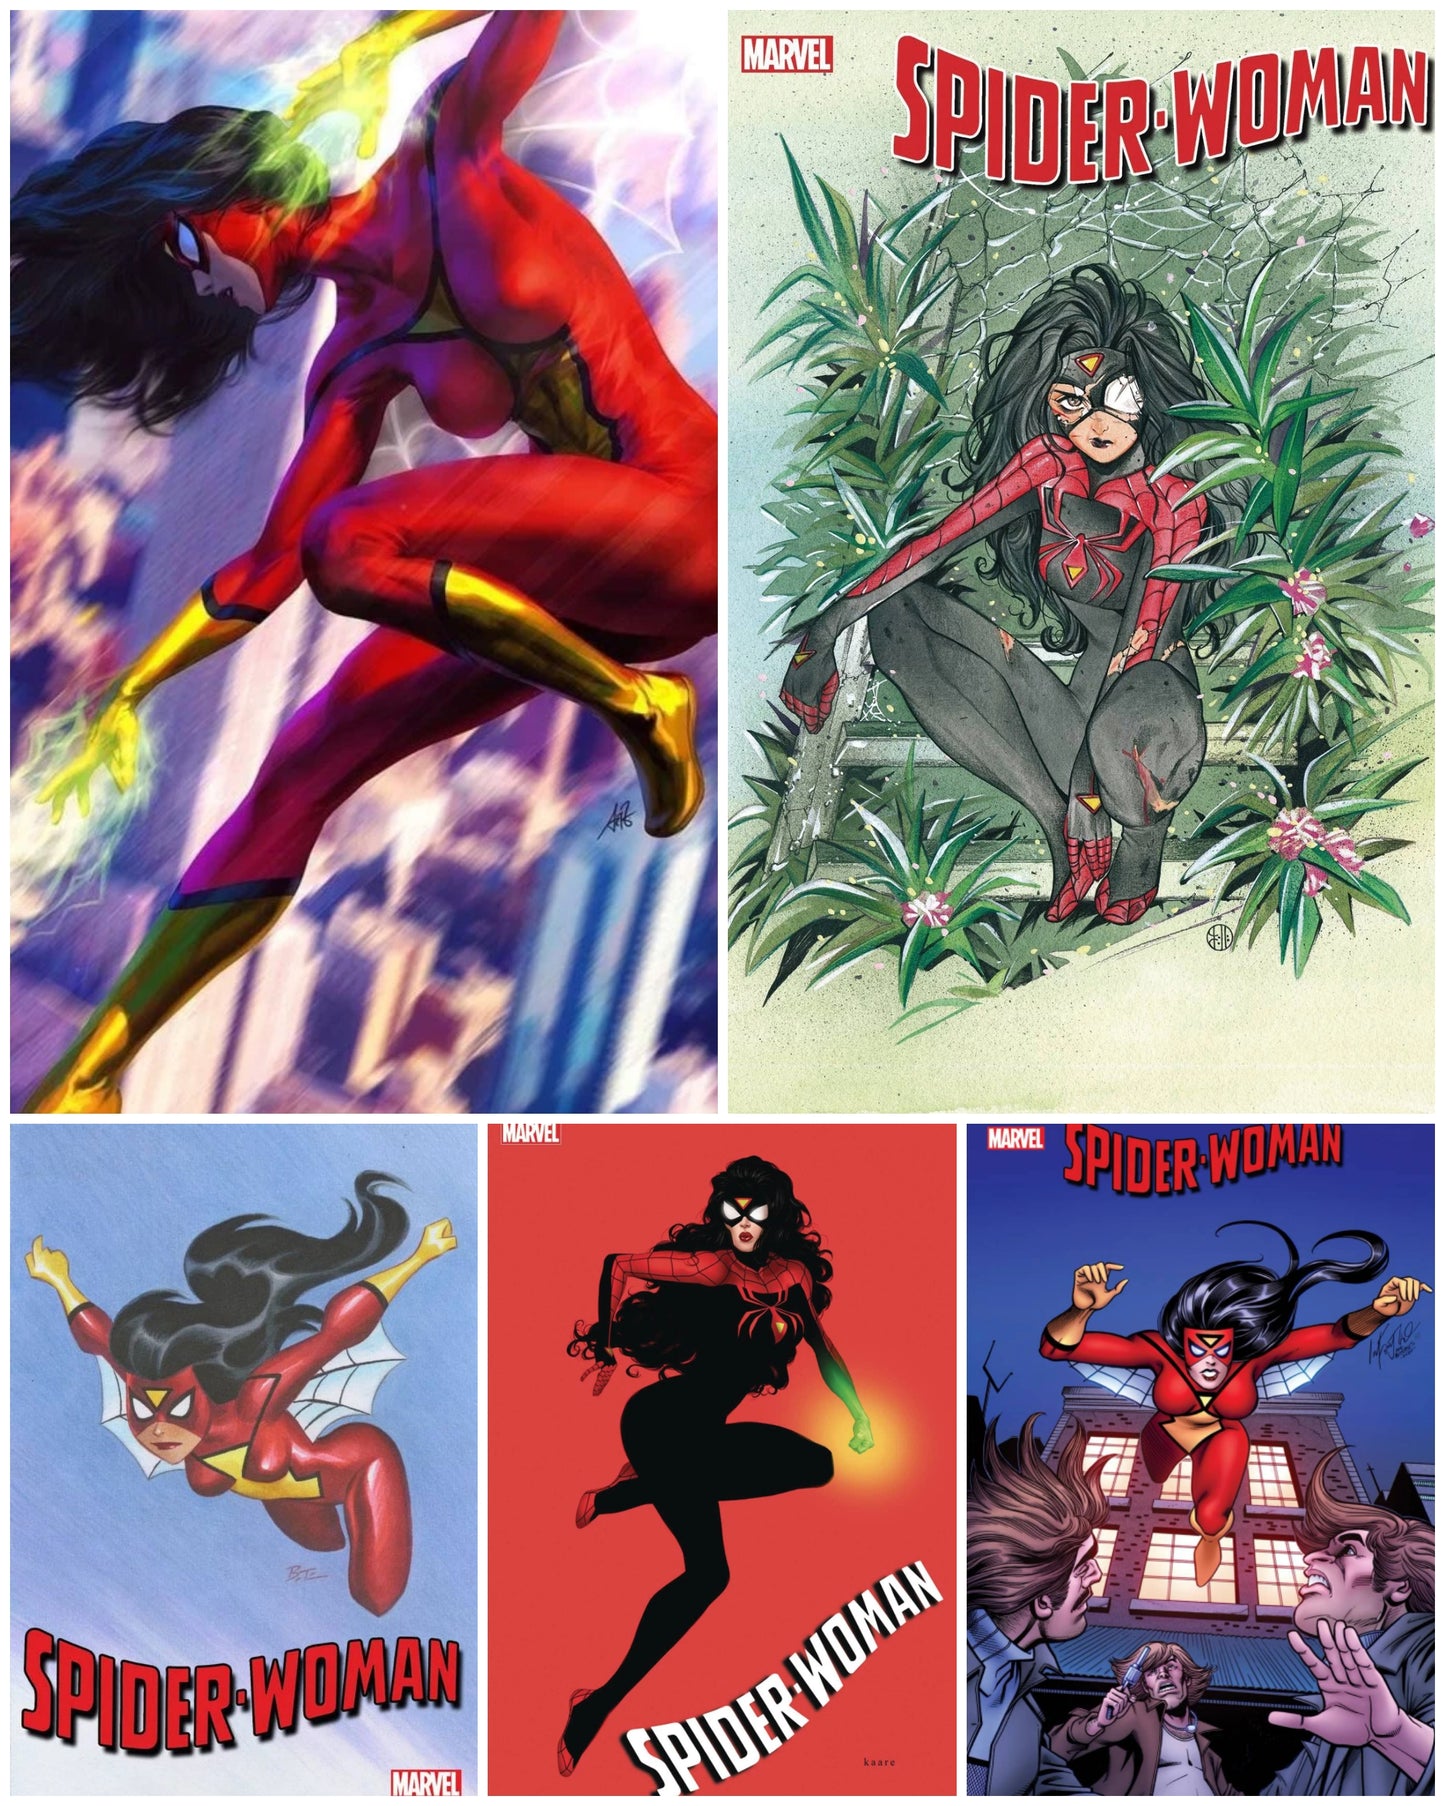 SPIDER-WOMAN #1 RATIO (1:500, 1:200, 1:100, 1:25, 1:25 & 1:25) VARIANT SET of 6 2020